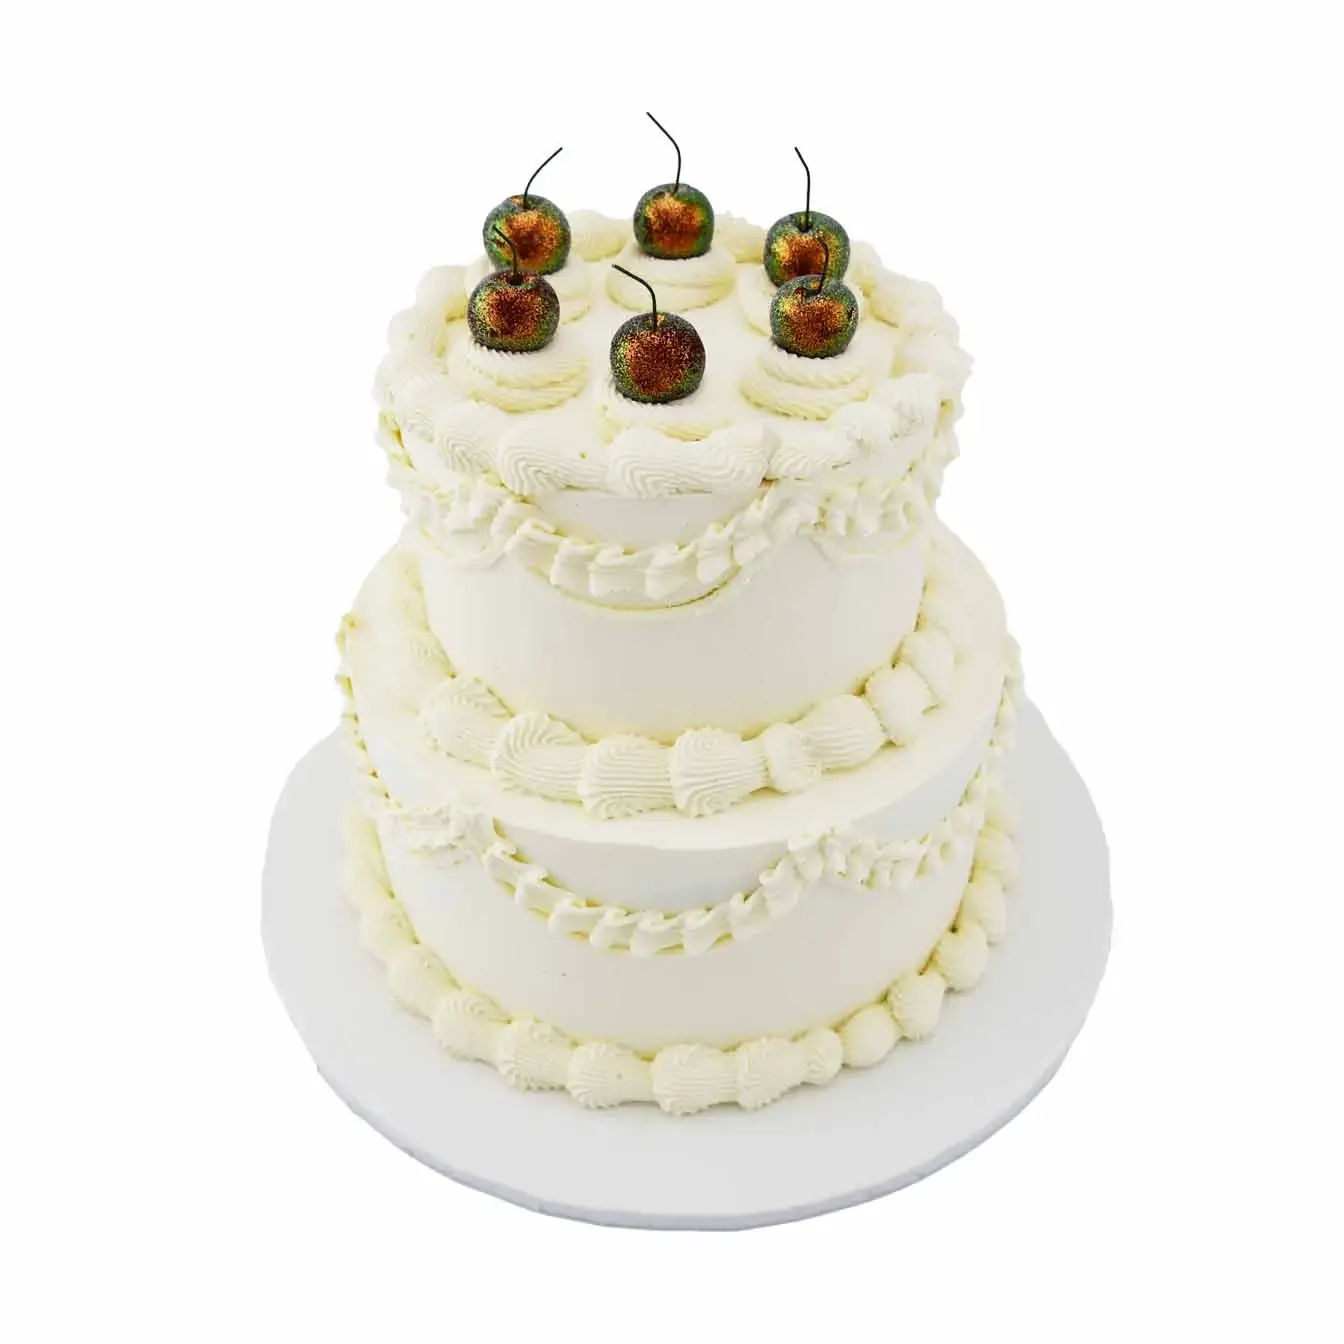 Two-tier vintage Heirloom Elegance Cake with white lambeth-style decoration